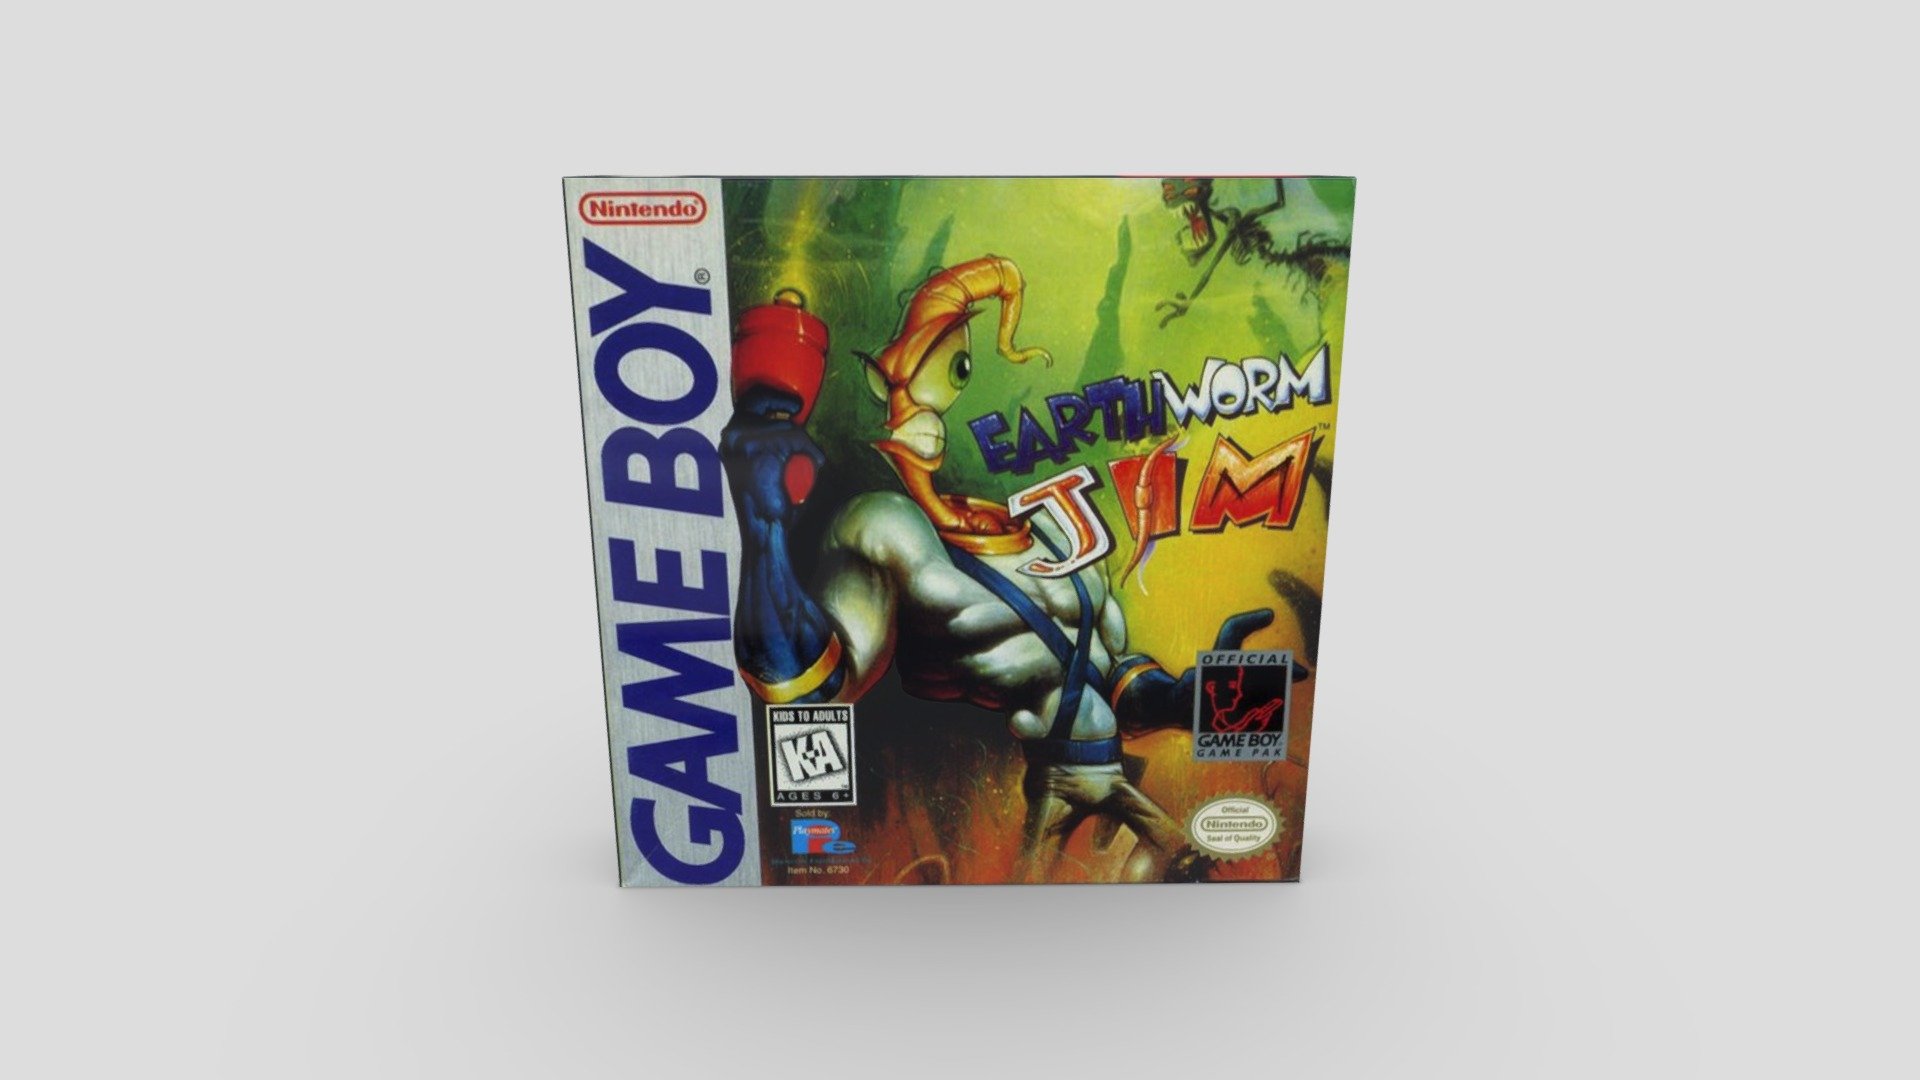 Earthworm Jim is a 1994 run and gun platform game developed by Shiny Entertainment, featuring an earthworm named Jim, who wears a robotic suit and battles evil 3d model